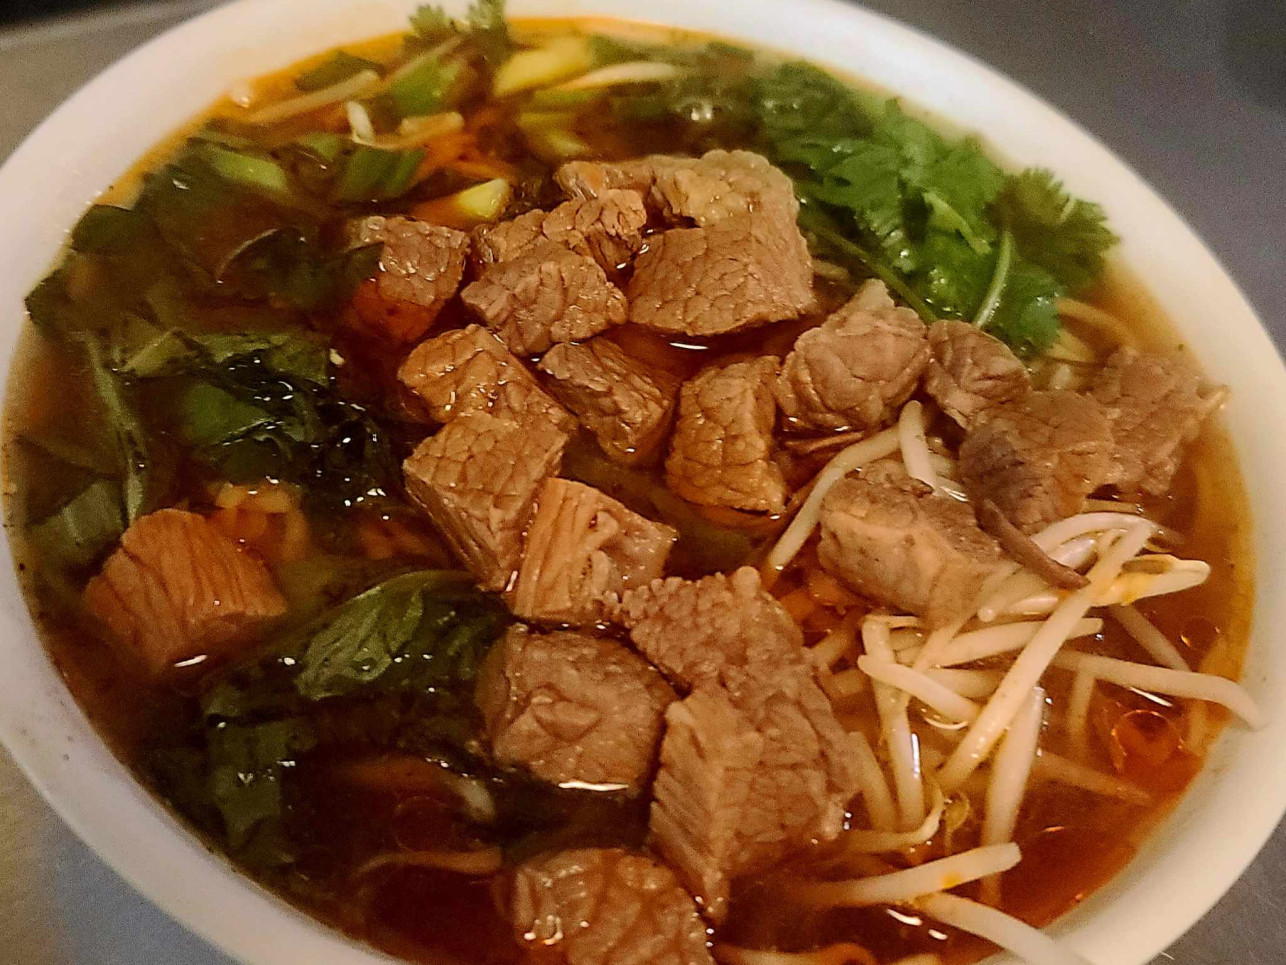 Tawainese Beef Noodle soup provided by LikeMyThai